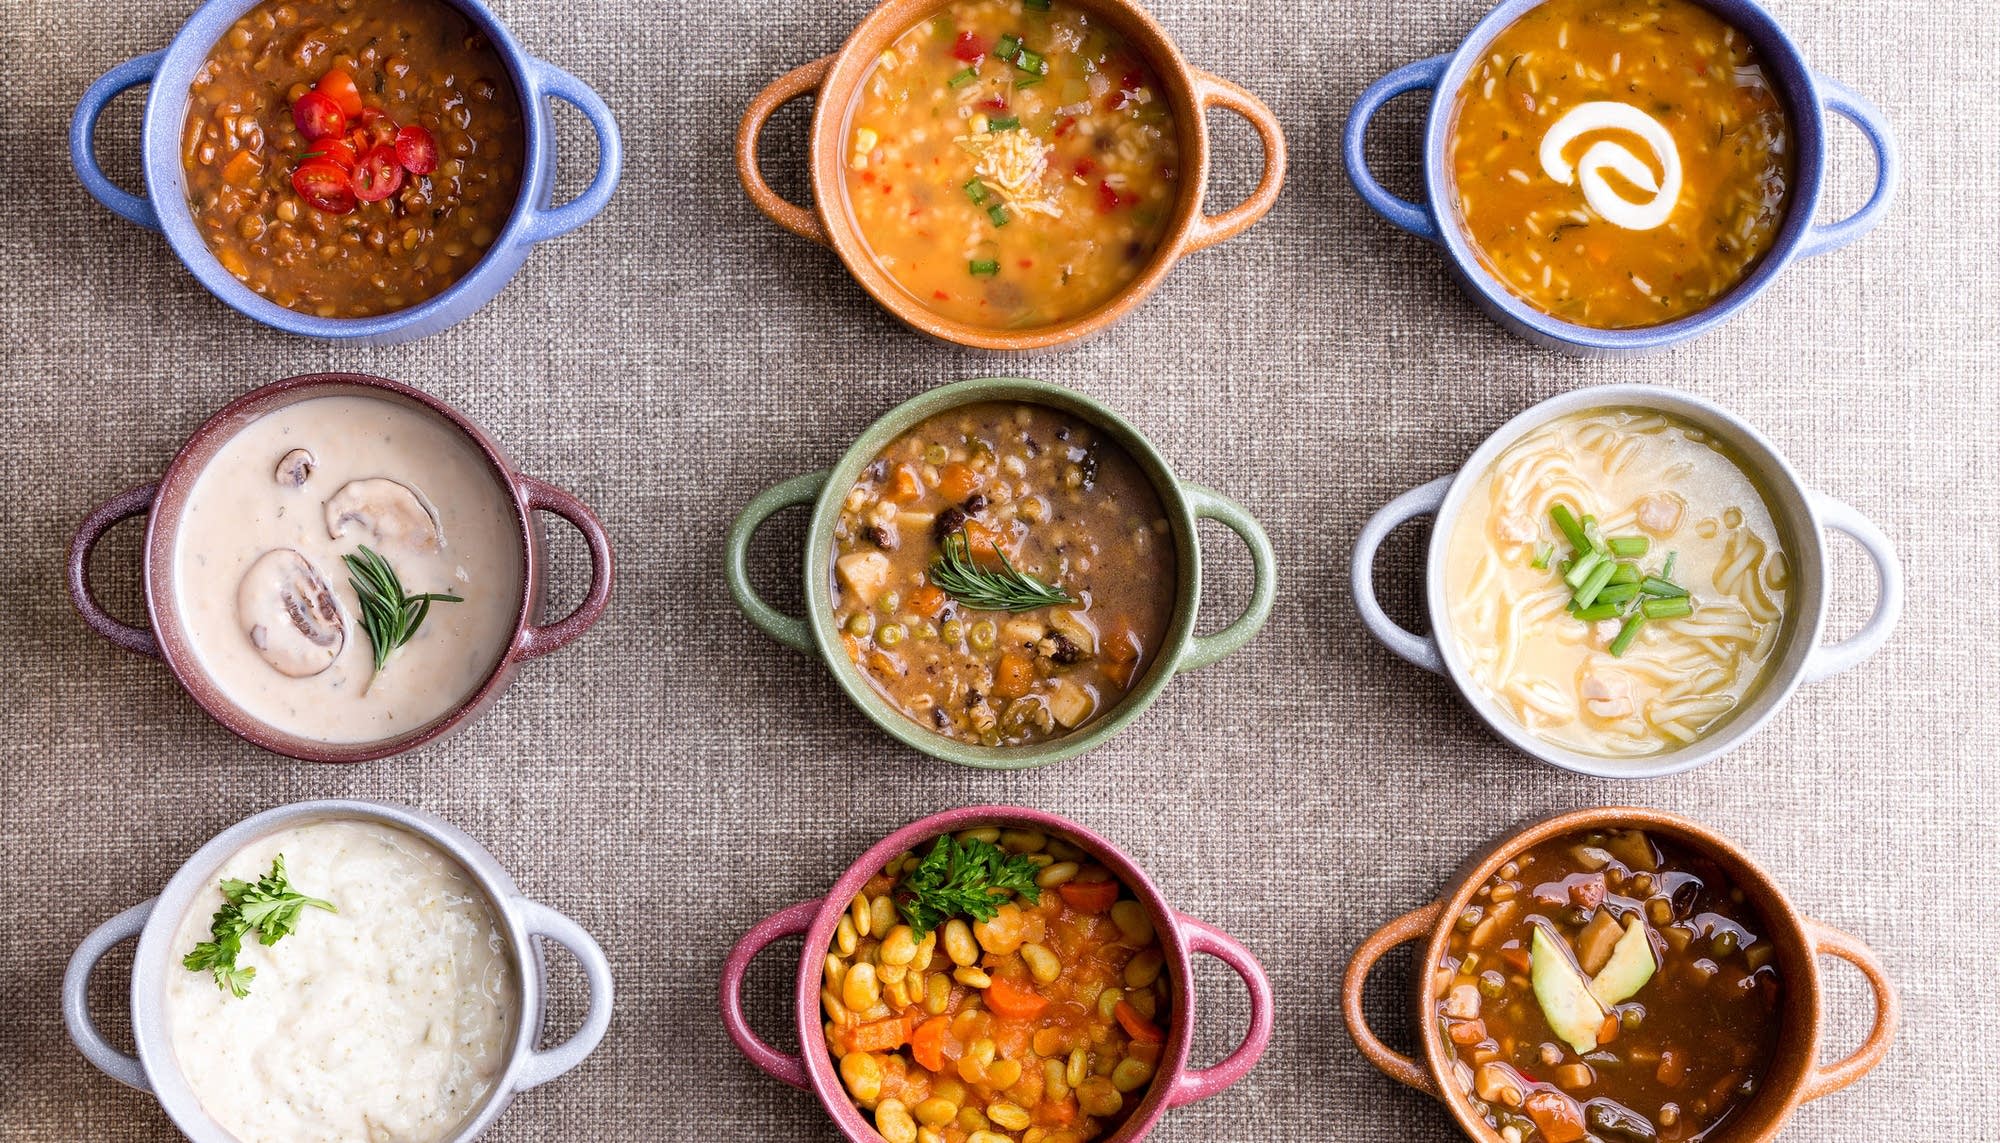 Bowls of various soups